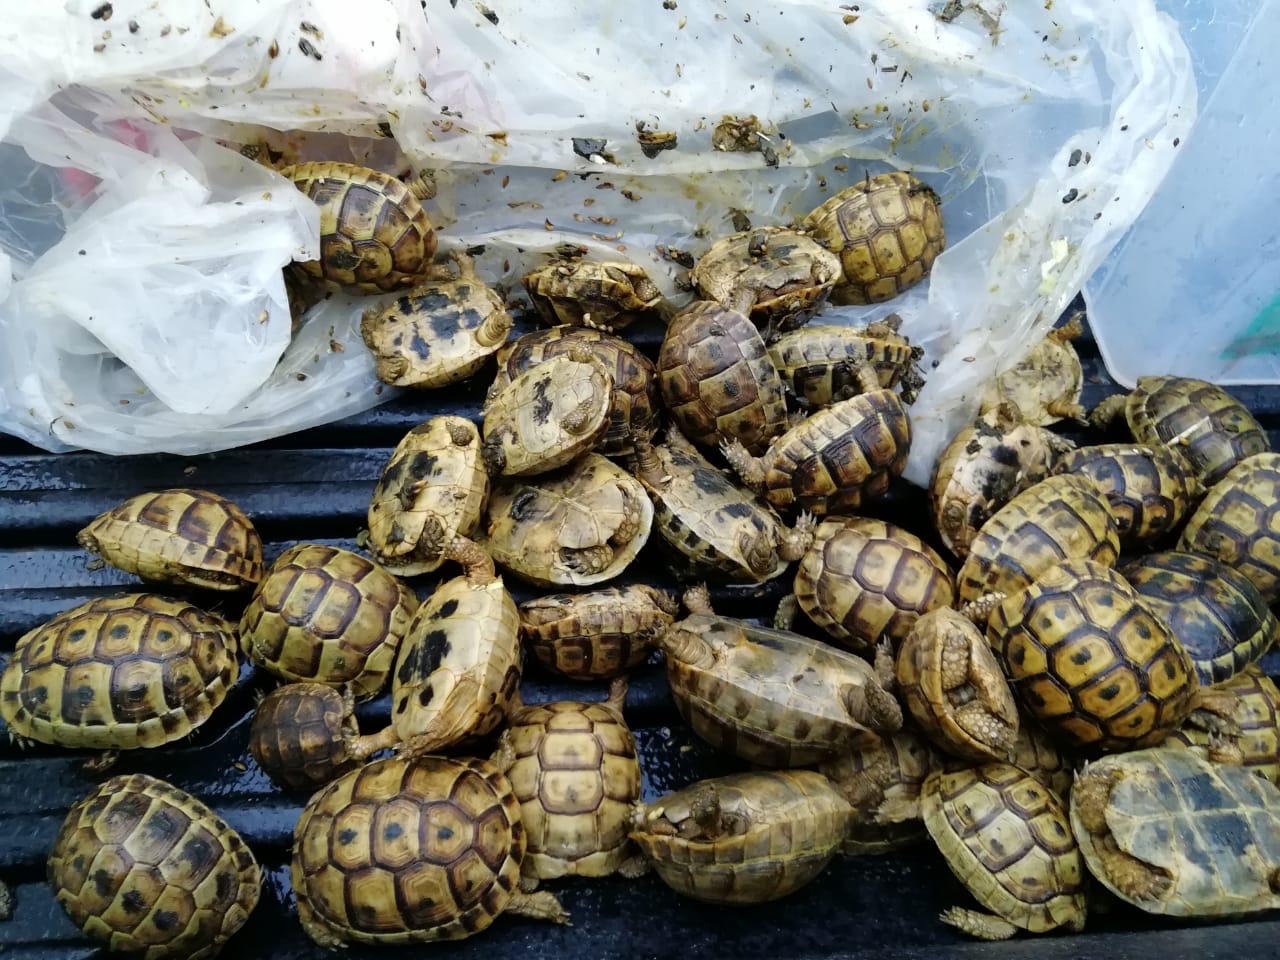 Confiscated Greek Tortoises